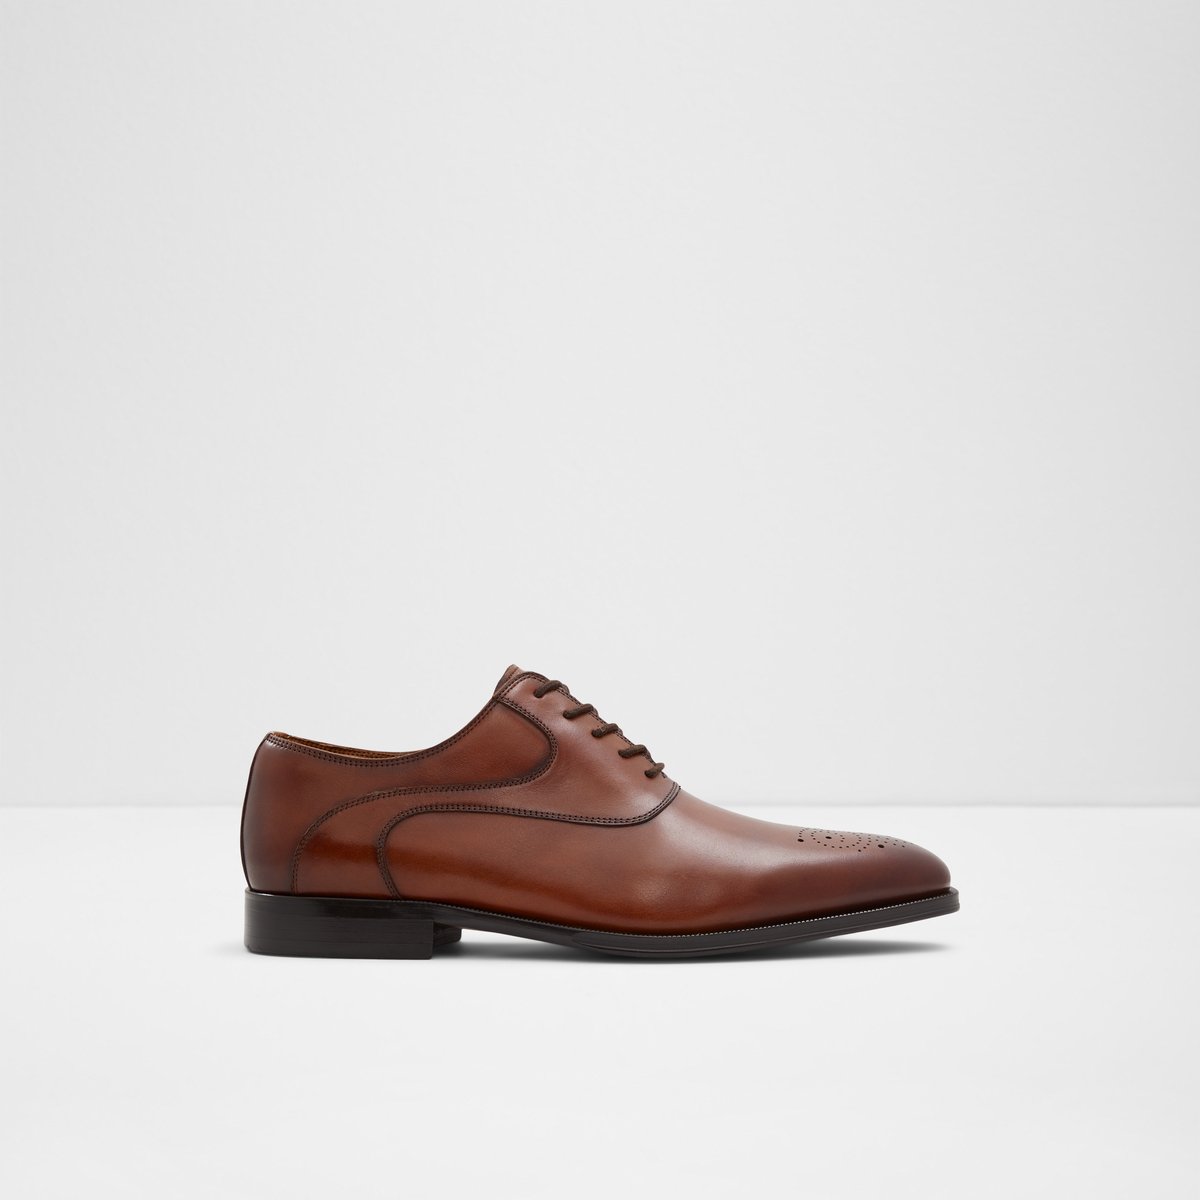 Simmons Oxford Shoes